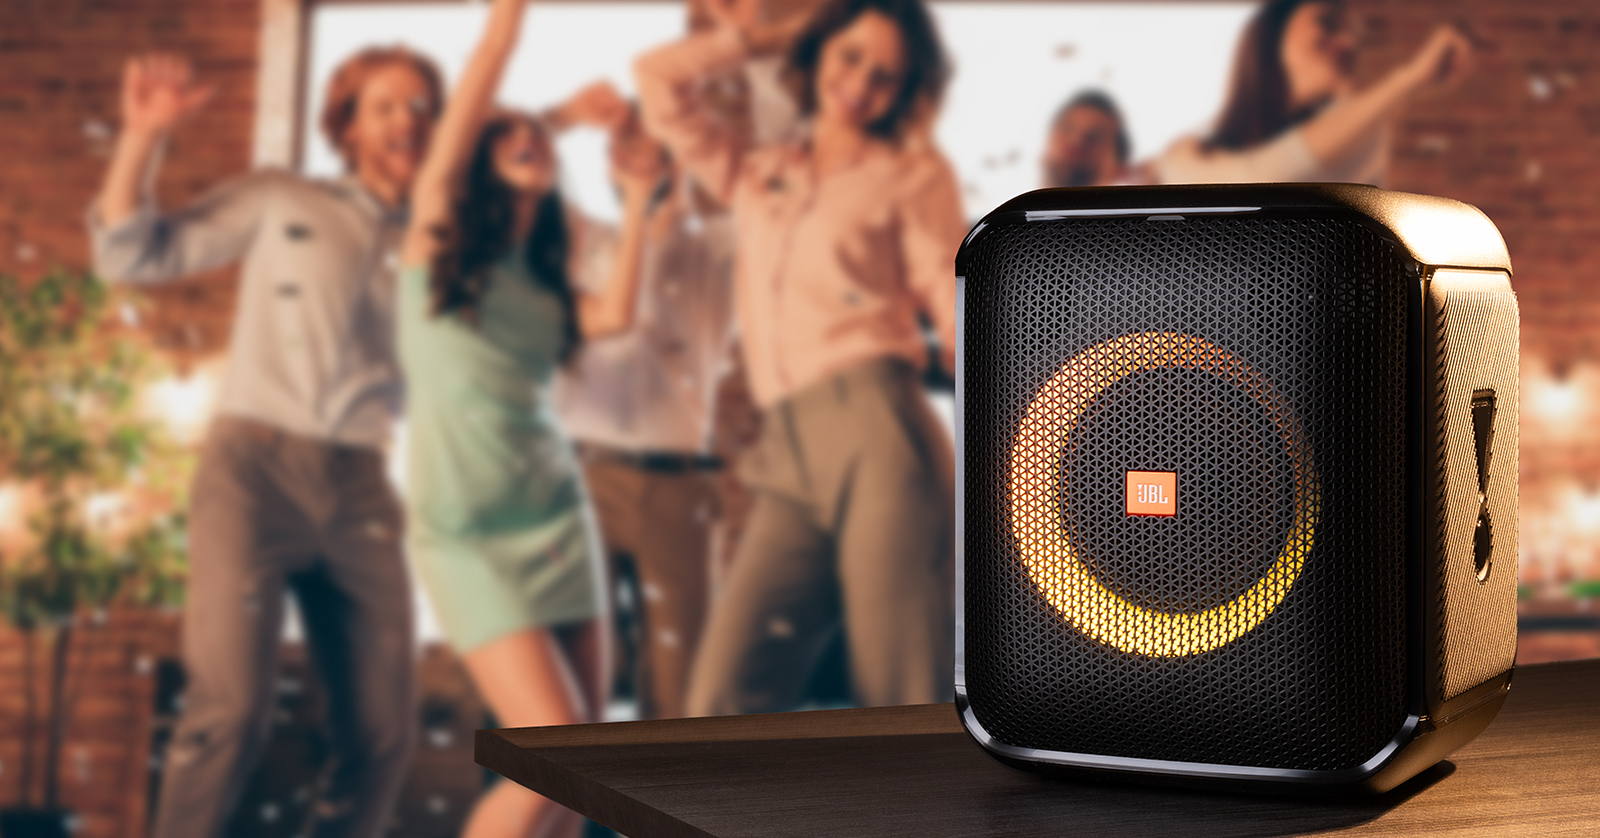 Review: The JBL PartyBox 110 portable speaker is top notch at a great price